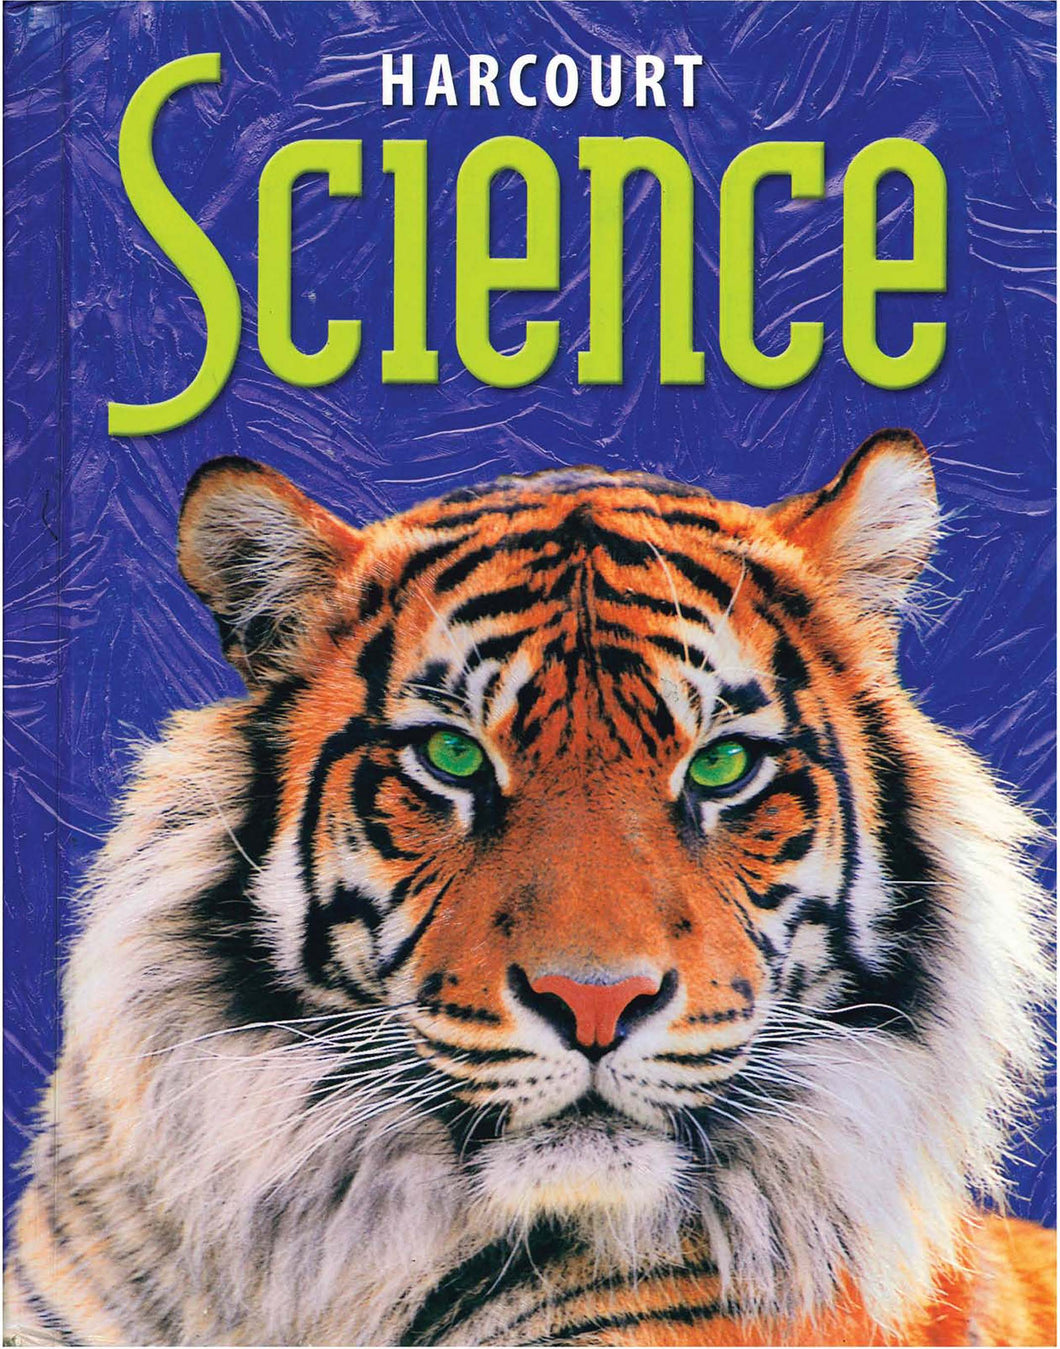 Harcourt Science Grades 5/6 Textbook - Used